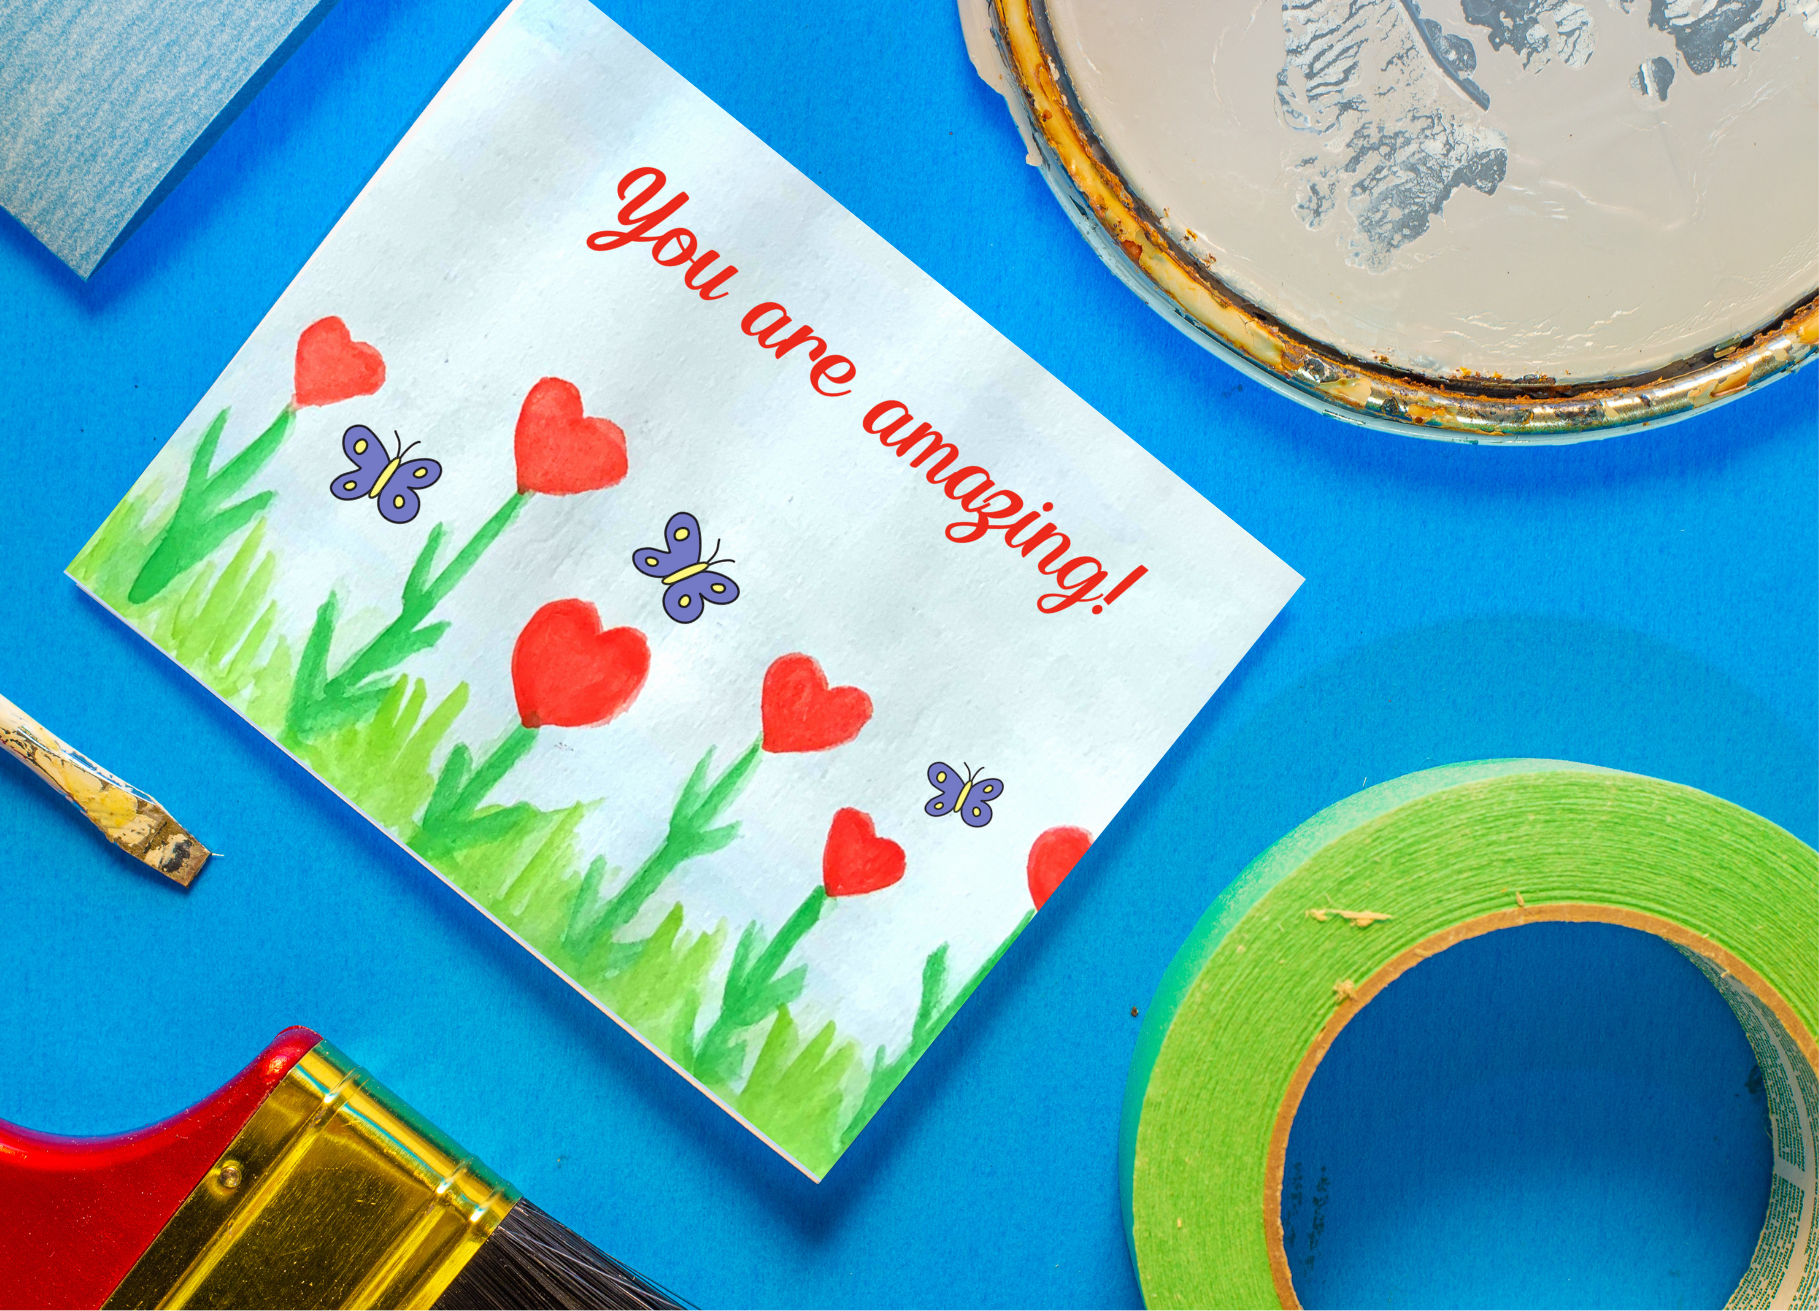 A photograph of a postcard with the words ‘You are amazing.’ The design is of red heart flowers growing between blades of green grass. Purple and yellow butterflies flutter in the blue sky. This watercolour has been hand-painted by a young child. The background of the photographs is blue. There are paint items surrounding the photo (card, a paint tub lid, green tape, a red handled brush and a smaller paintbrush).